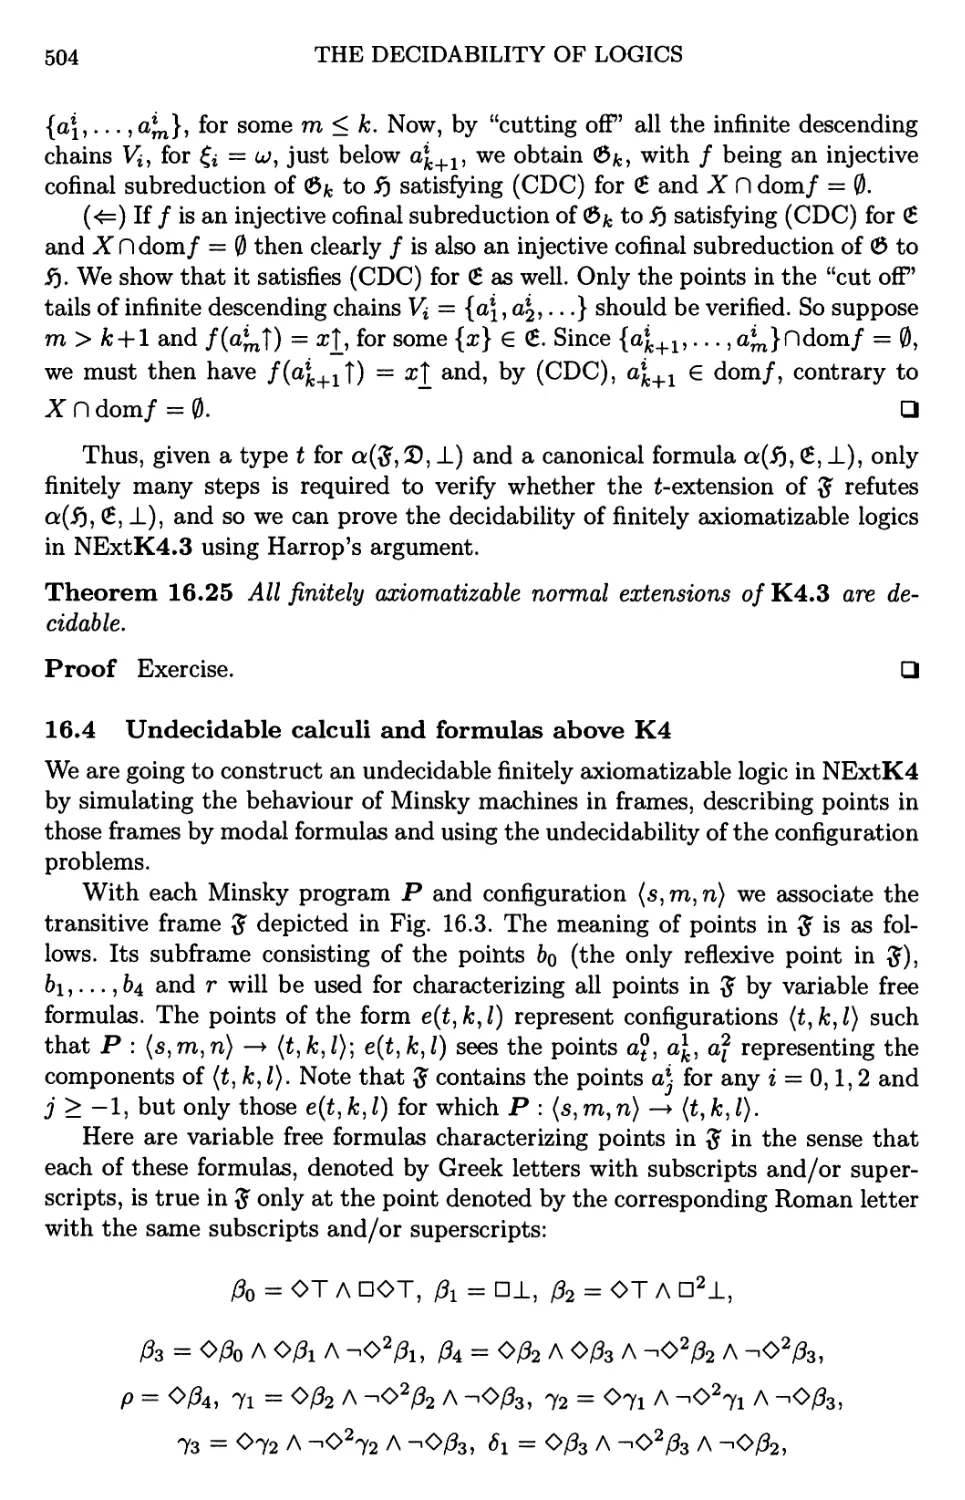 16.4 Undecidable calculi and formulas above K4